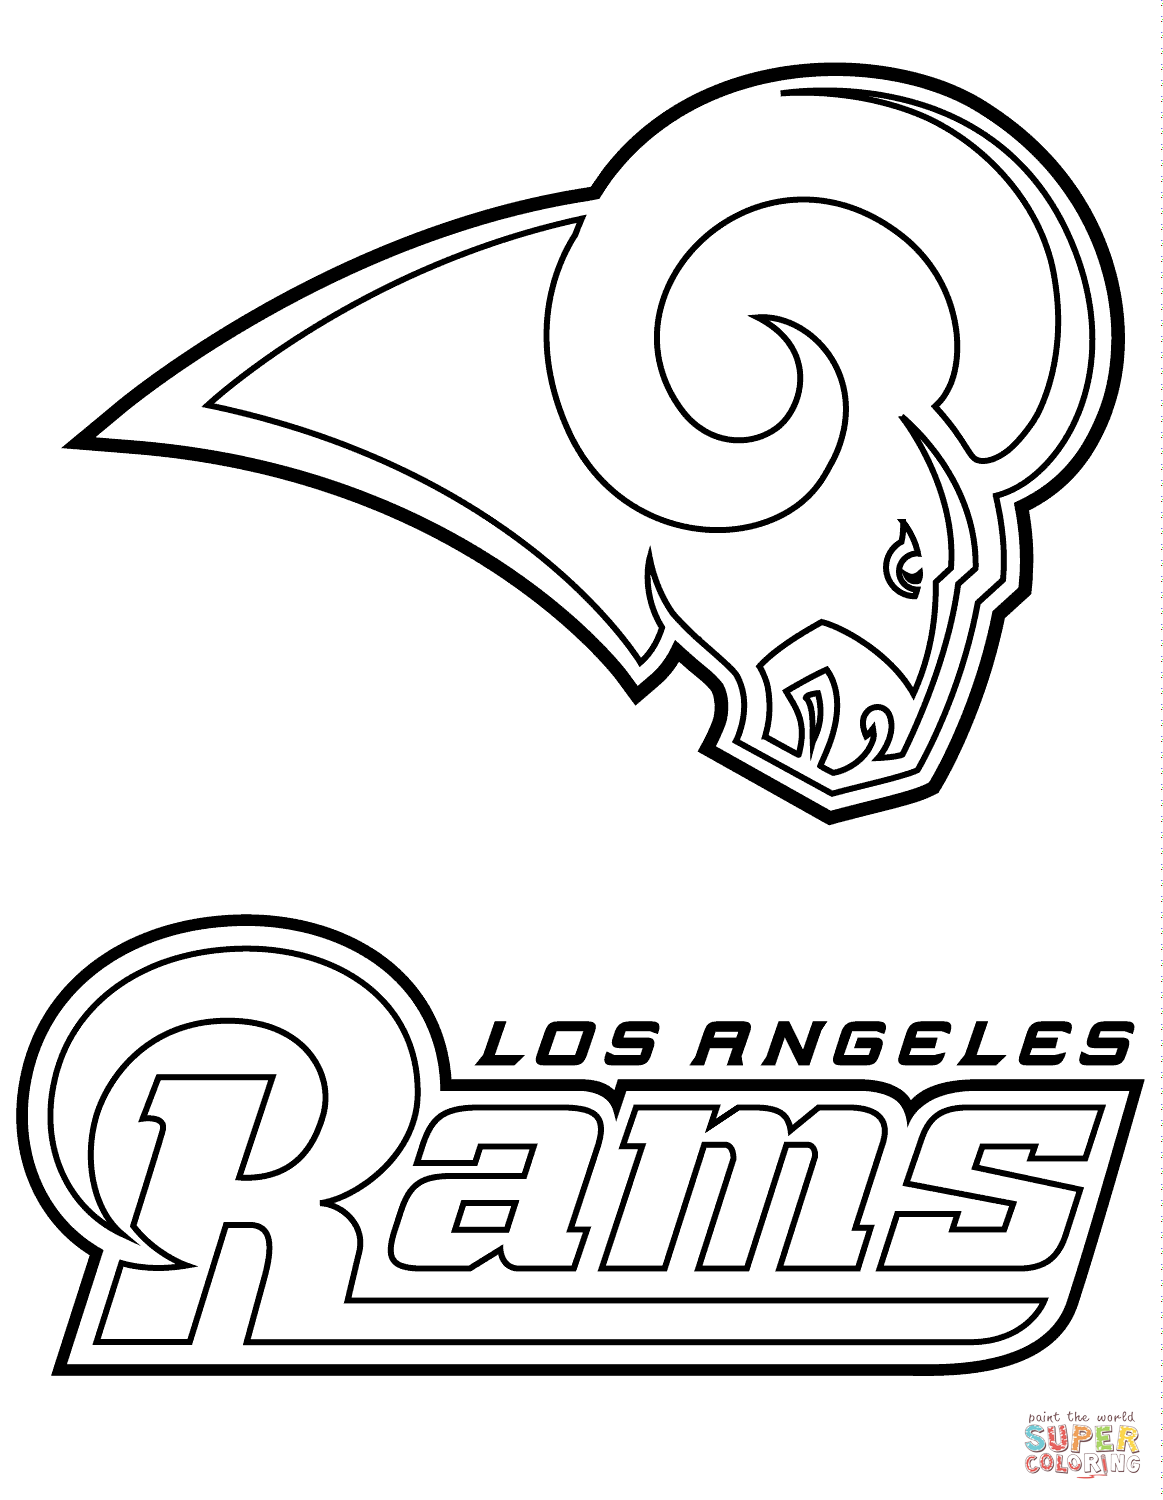 Los Angeles Rams Logo coloring page | Free Printable Coloring Pages